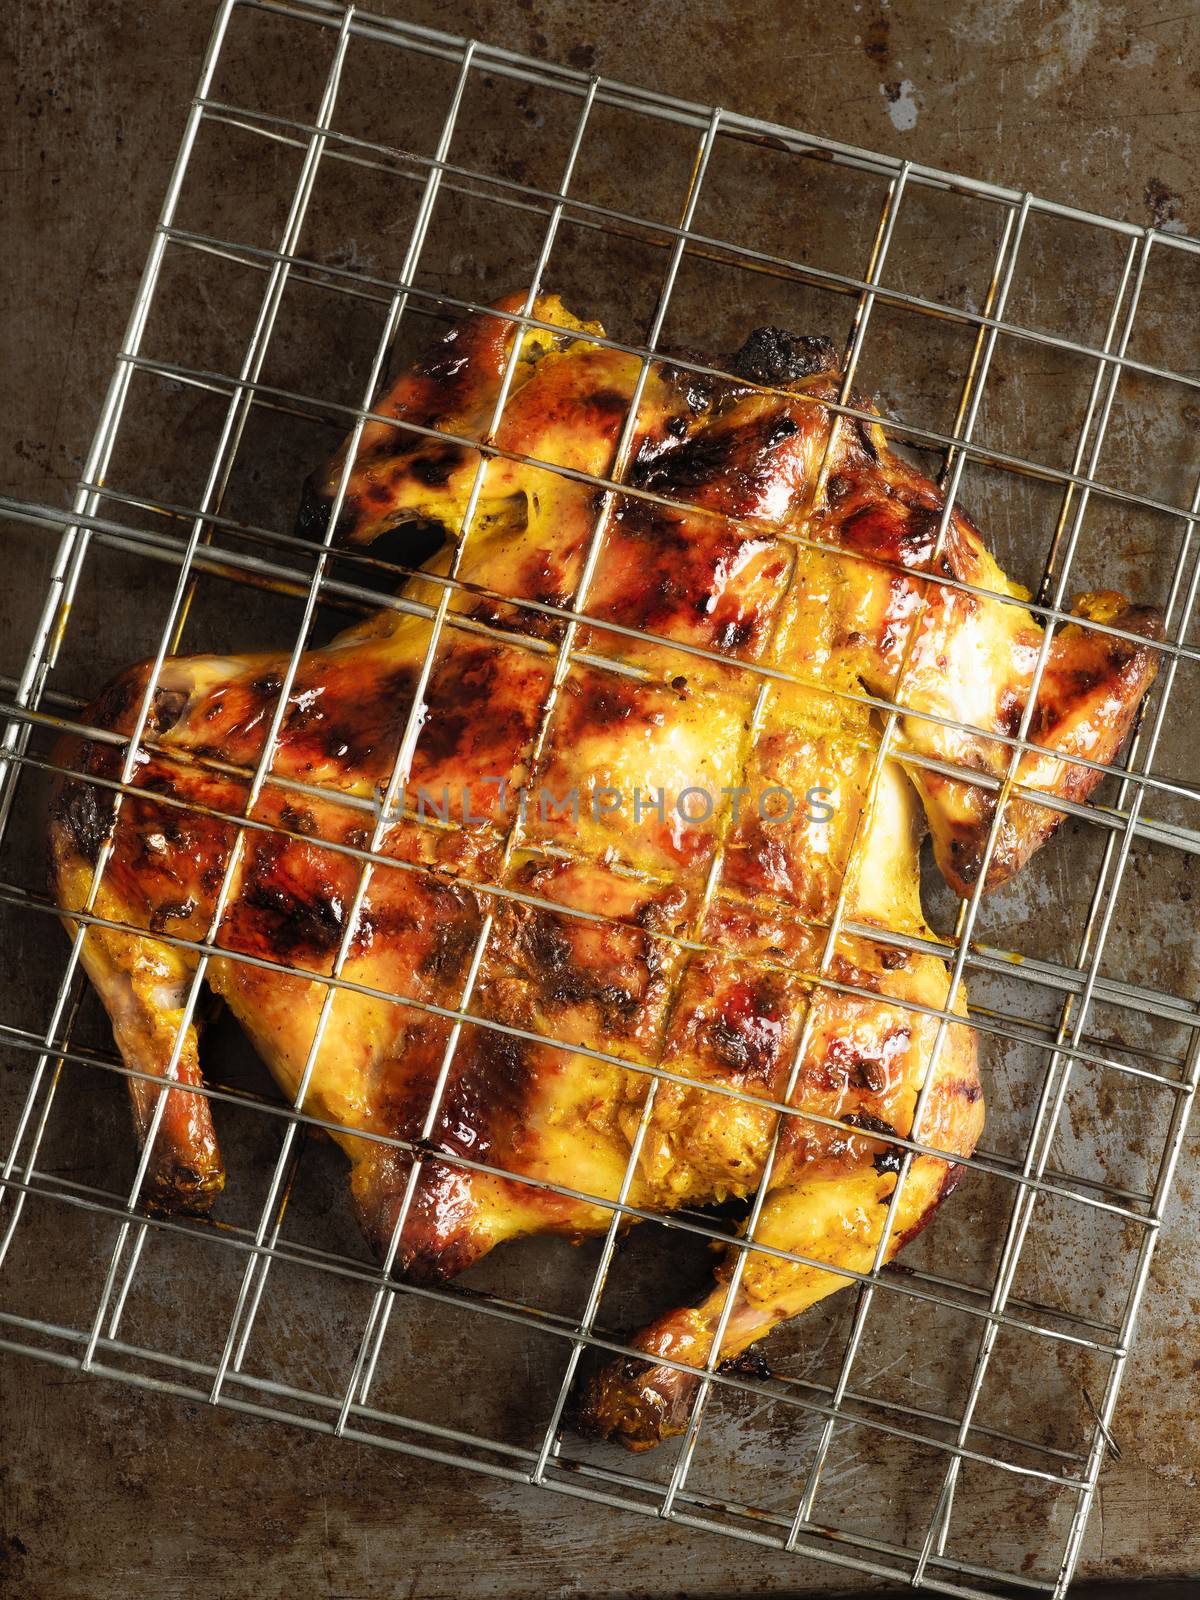 rustic barbecued whole chicken by zkruger